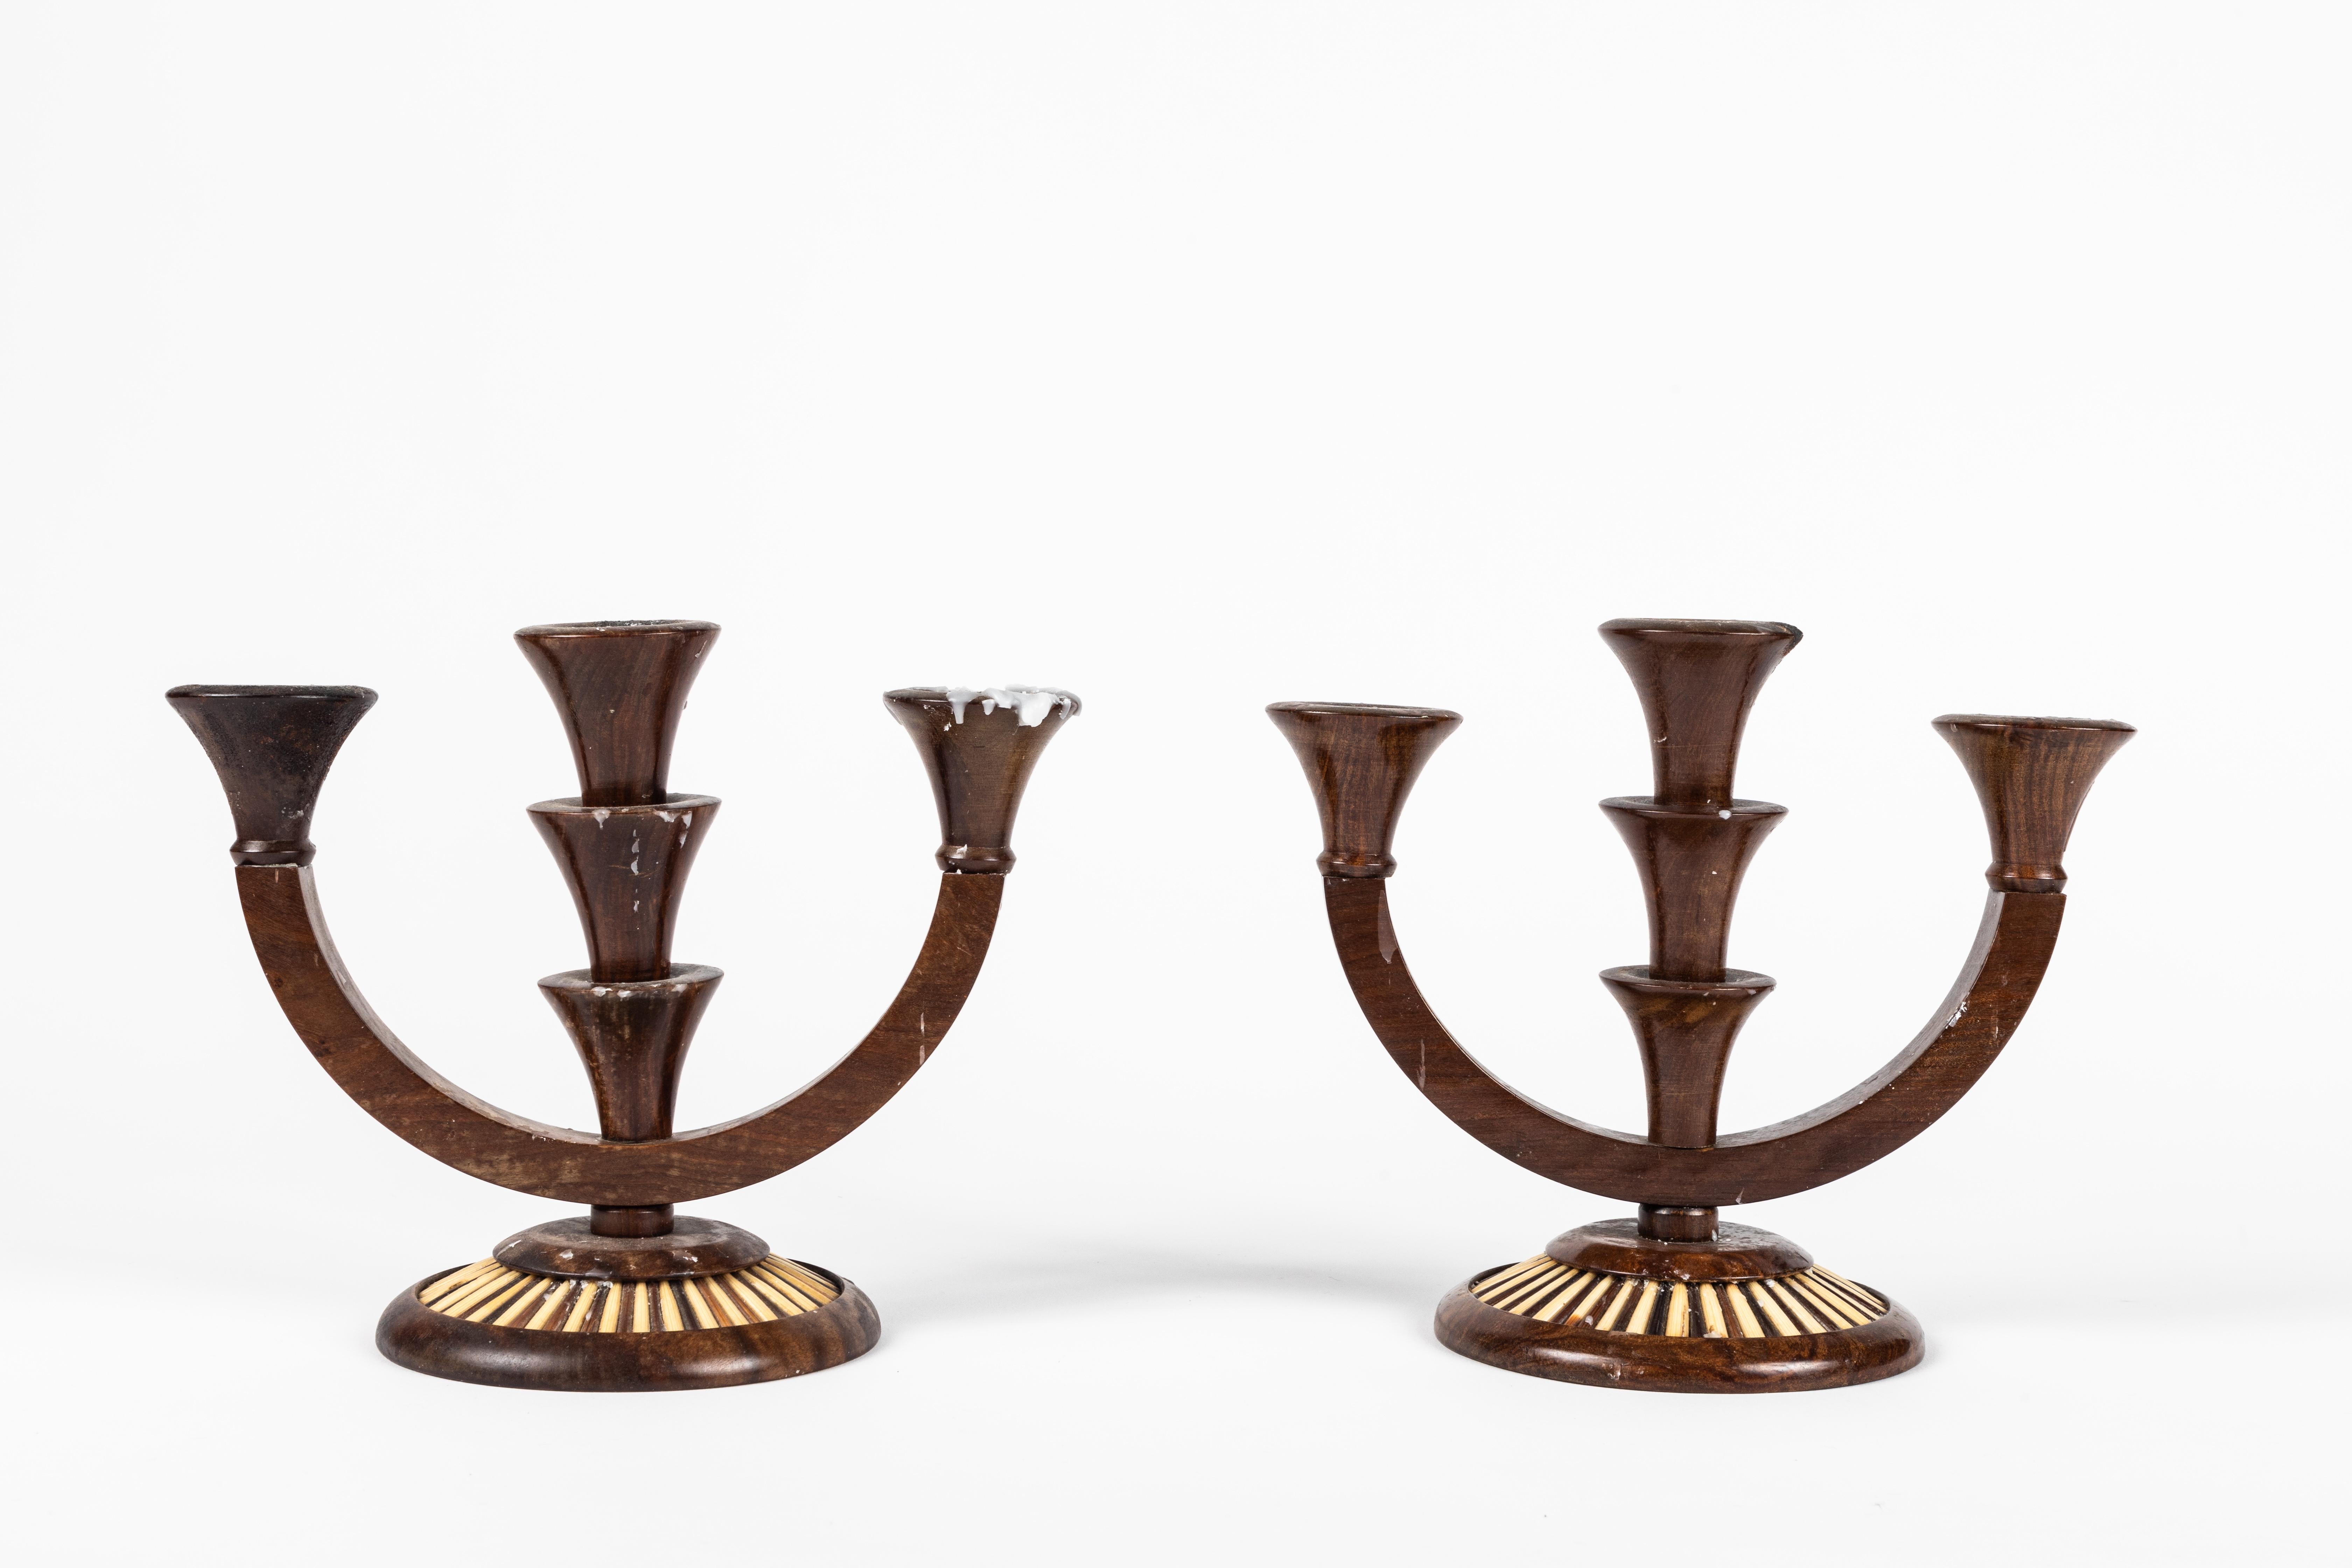 Pair of 3-arm rosewood candelabra with quill inset detail on base. English, 19th century.